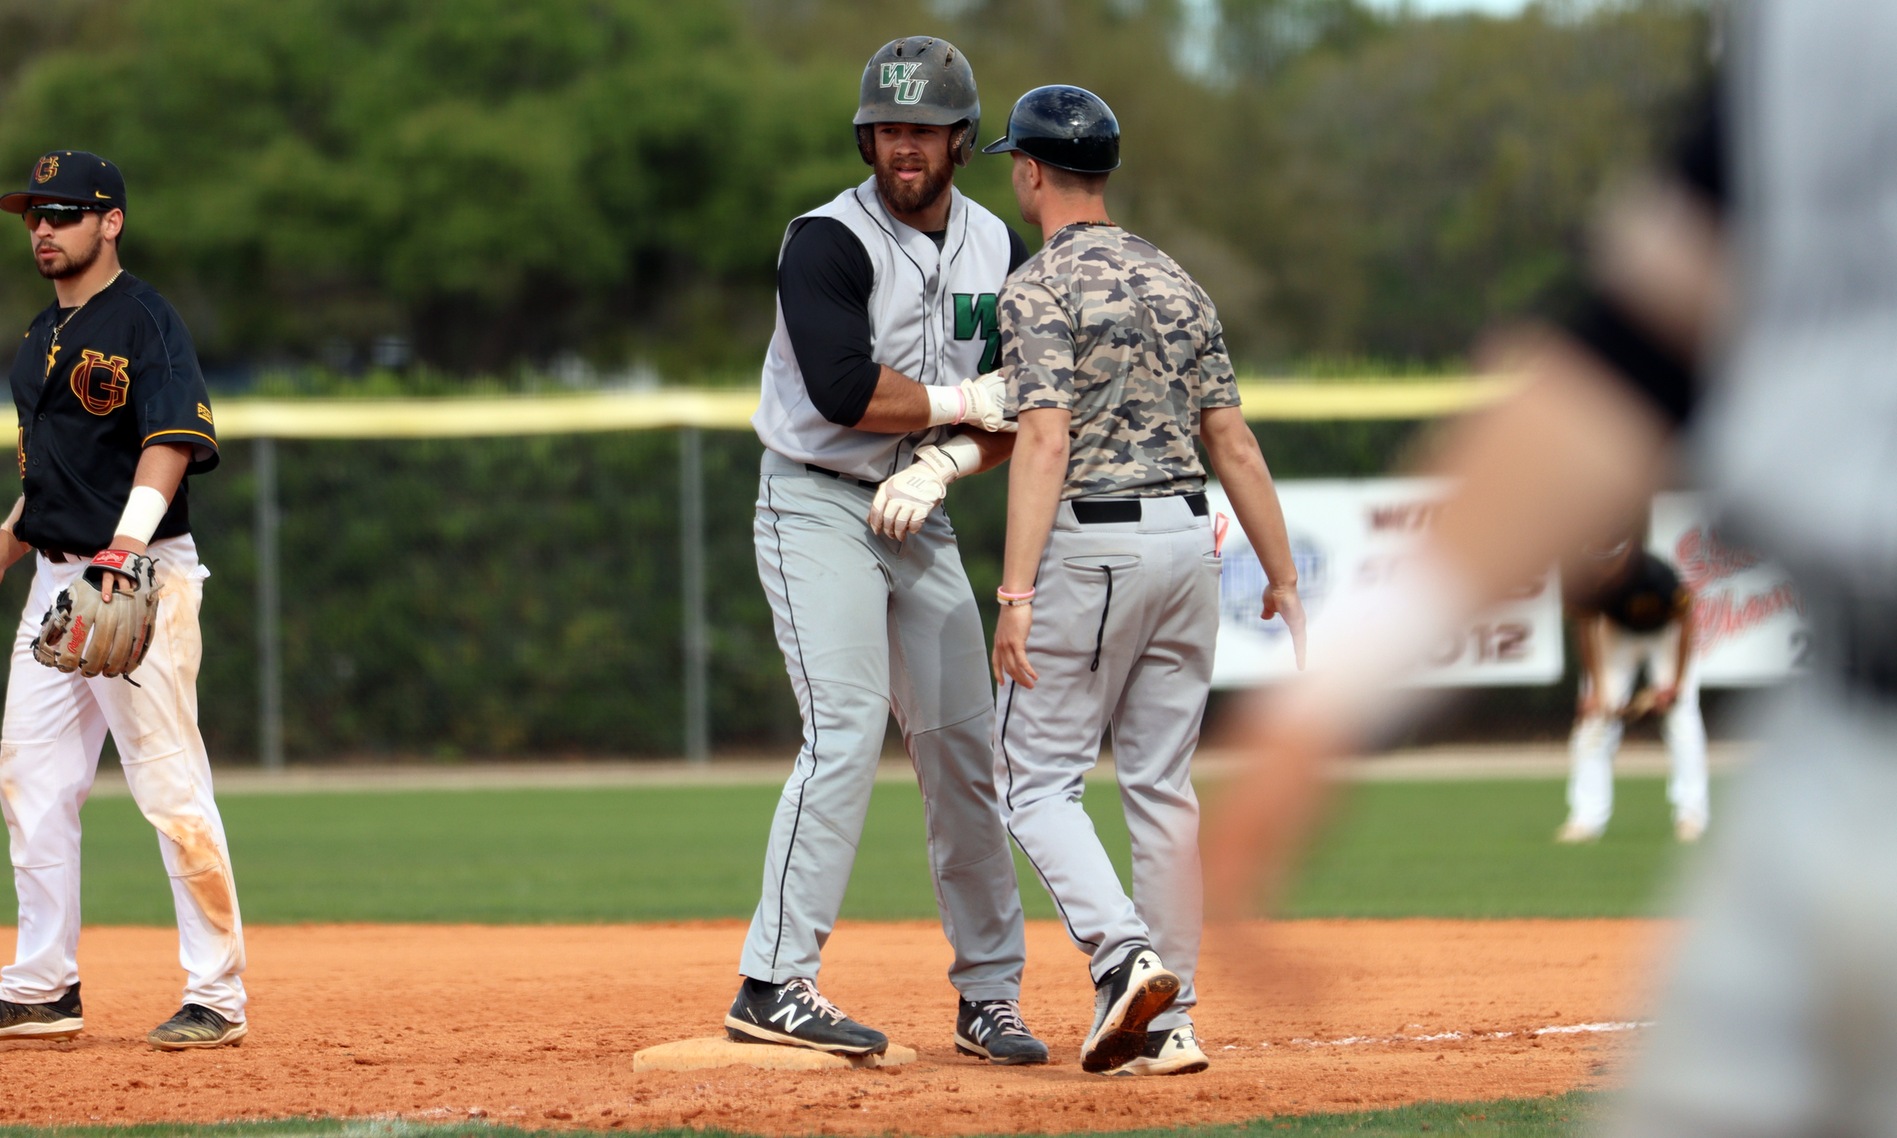 Photo of Brooks Ryan knocking in the go-ahead run in the eighth inning against Gannon. Copyright 2020; Wilmington University. All rights reserved. Photo by Dan Lauletta. March 6, 2020 vs. Gannon at Bing Tyus Yard in Winter Haven, Fla.